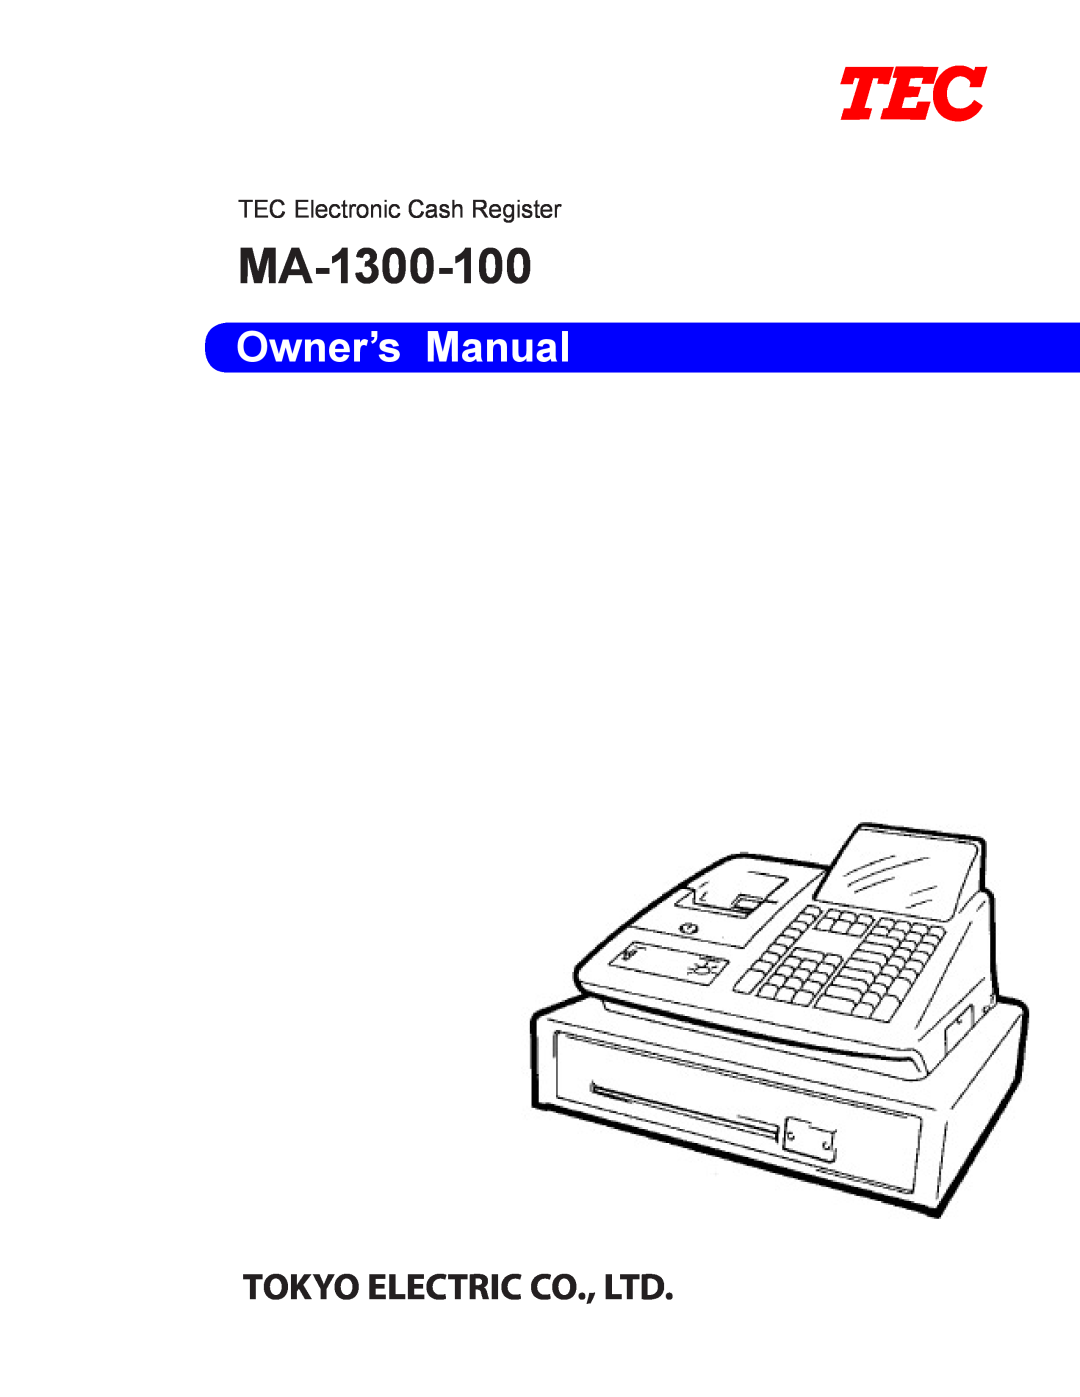 Toshiba MA-1300-100 owner manual Owner’s Manual, TEC Electronic Cash Register 